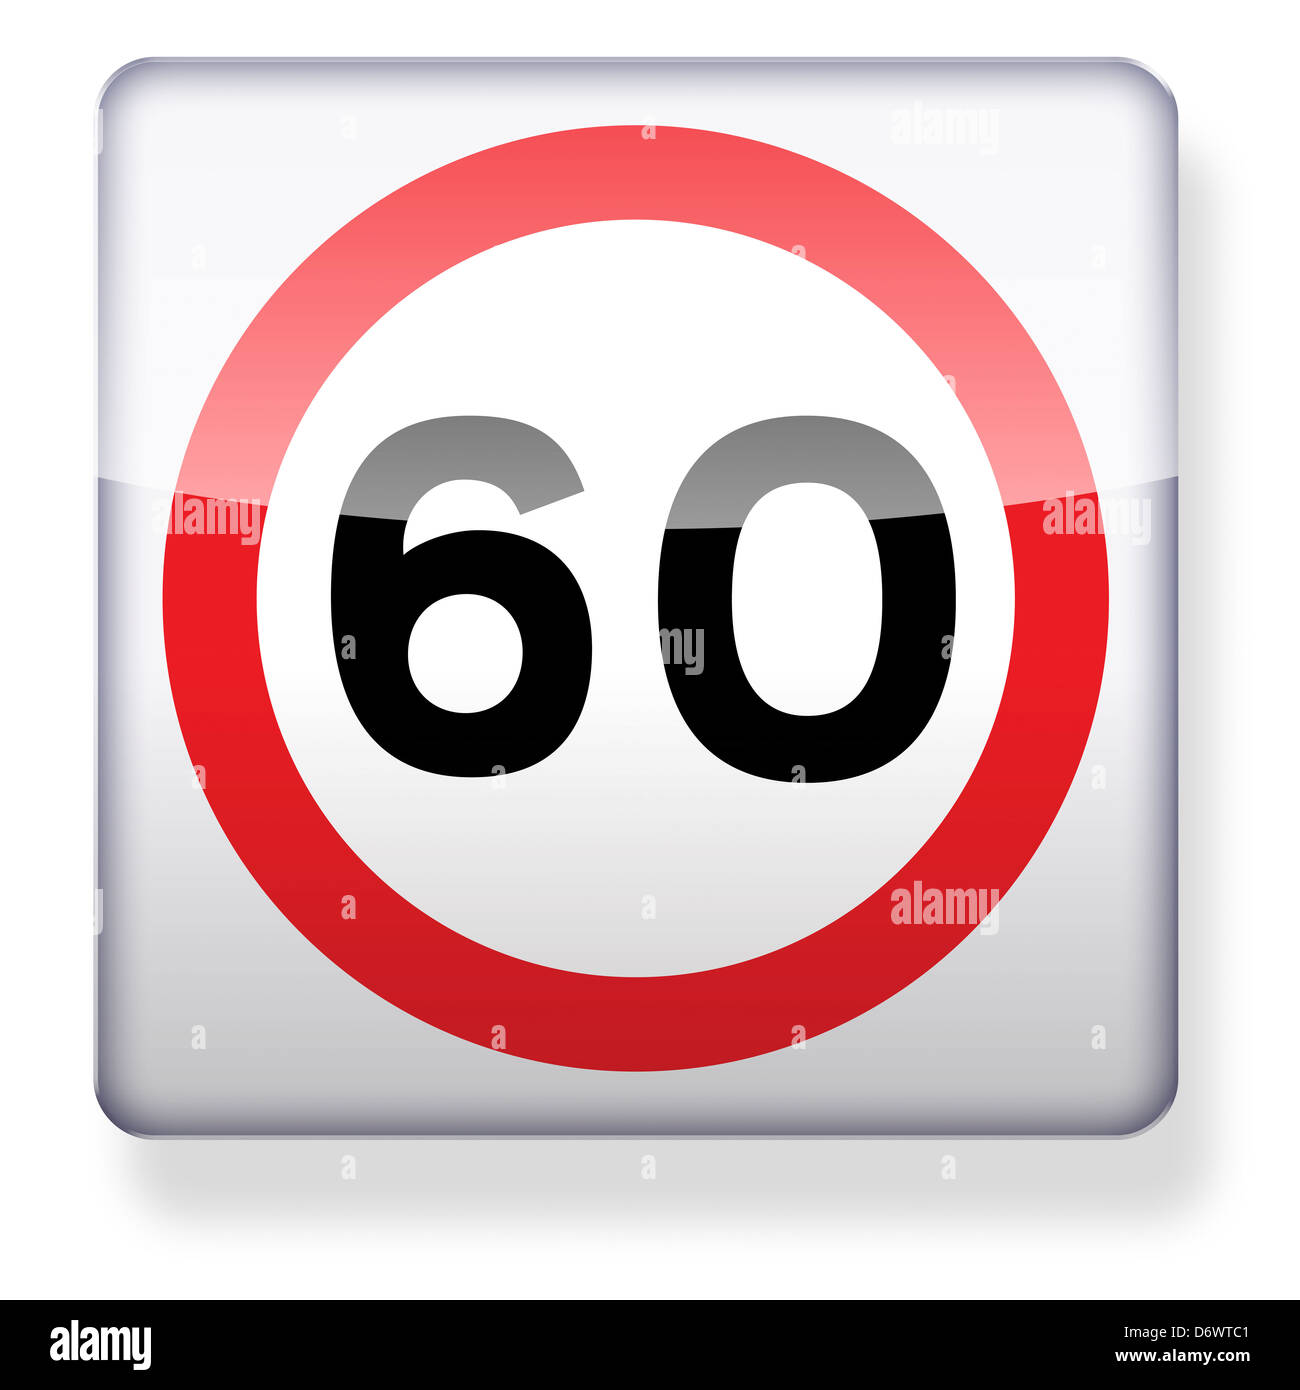 60 mph speed limit road sign as an app icon. Clipping path included. Stock Photo